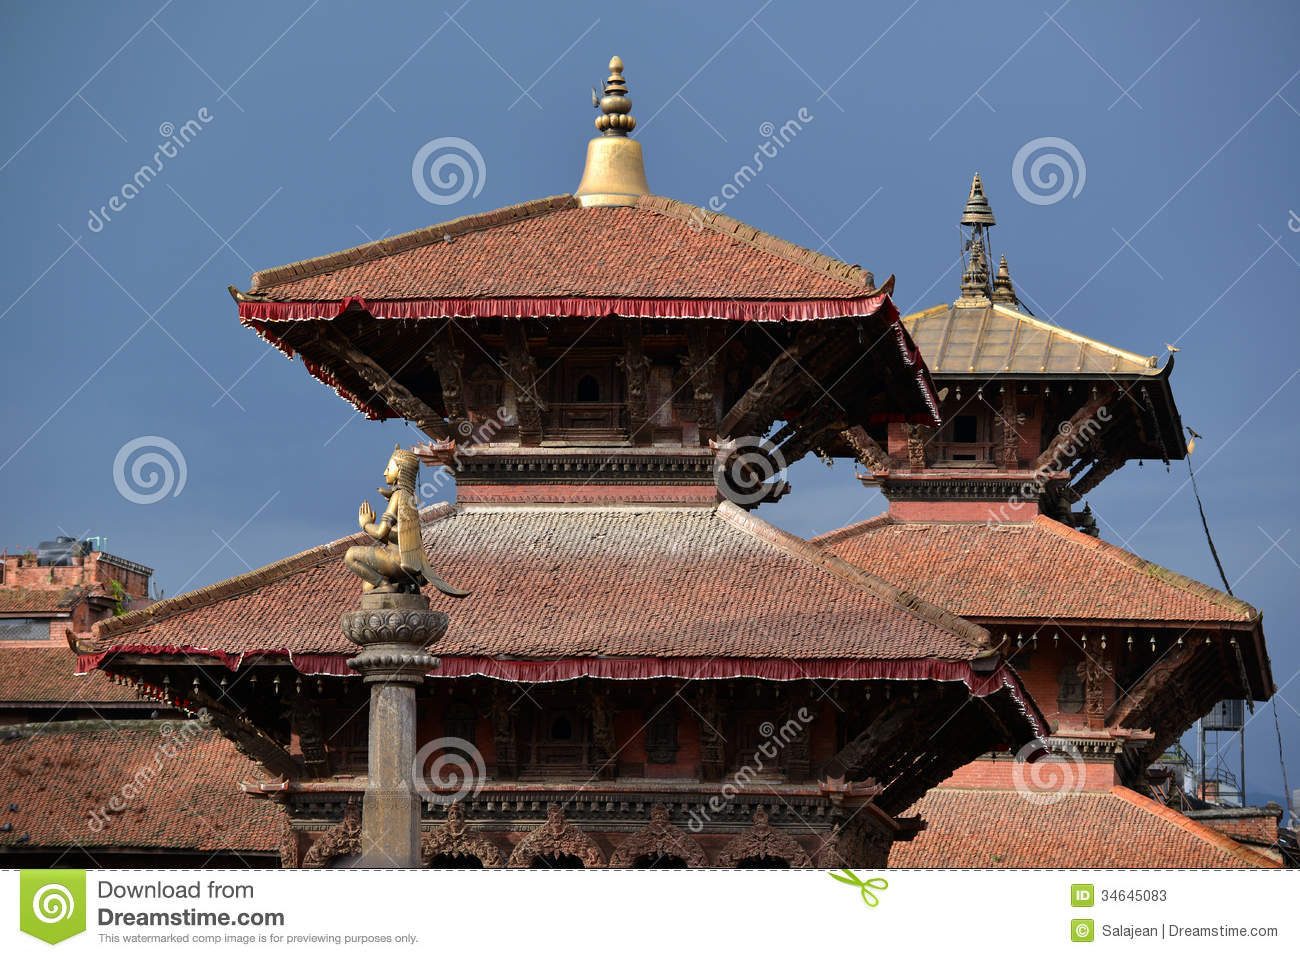 Nepalese Pagoda Backgrounds, Compatible - PC, Mobile, Gadgets| 1300x958 px